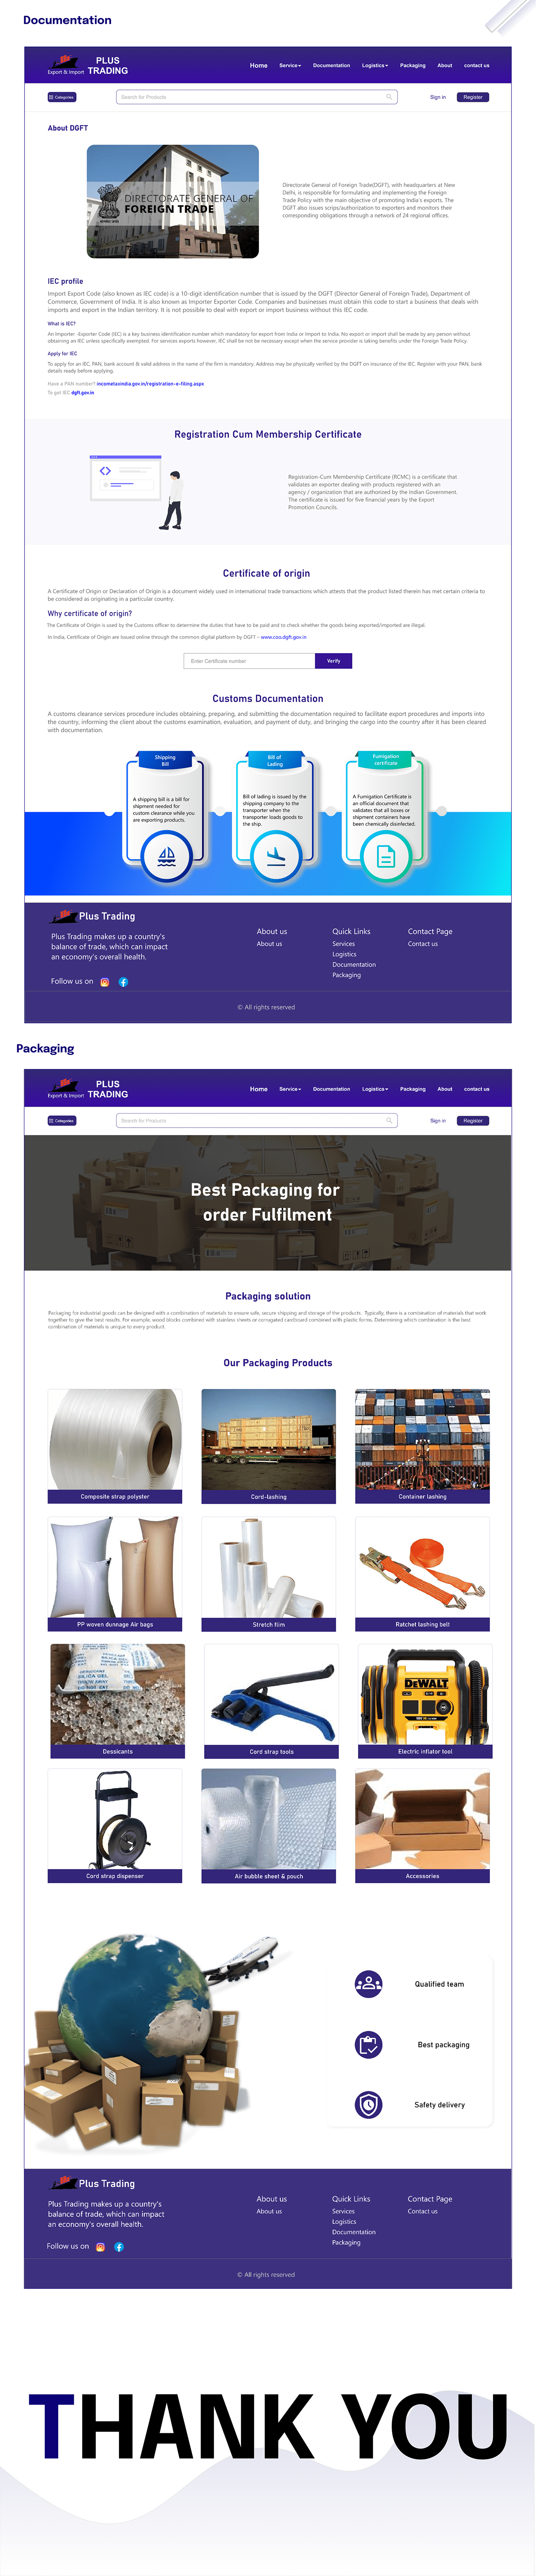 documentation export Import Logistics Packaging shipping trading